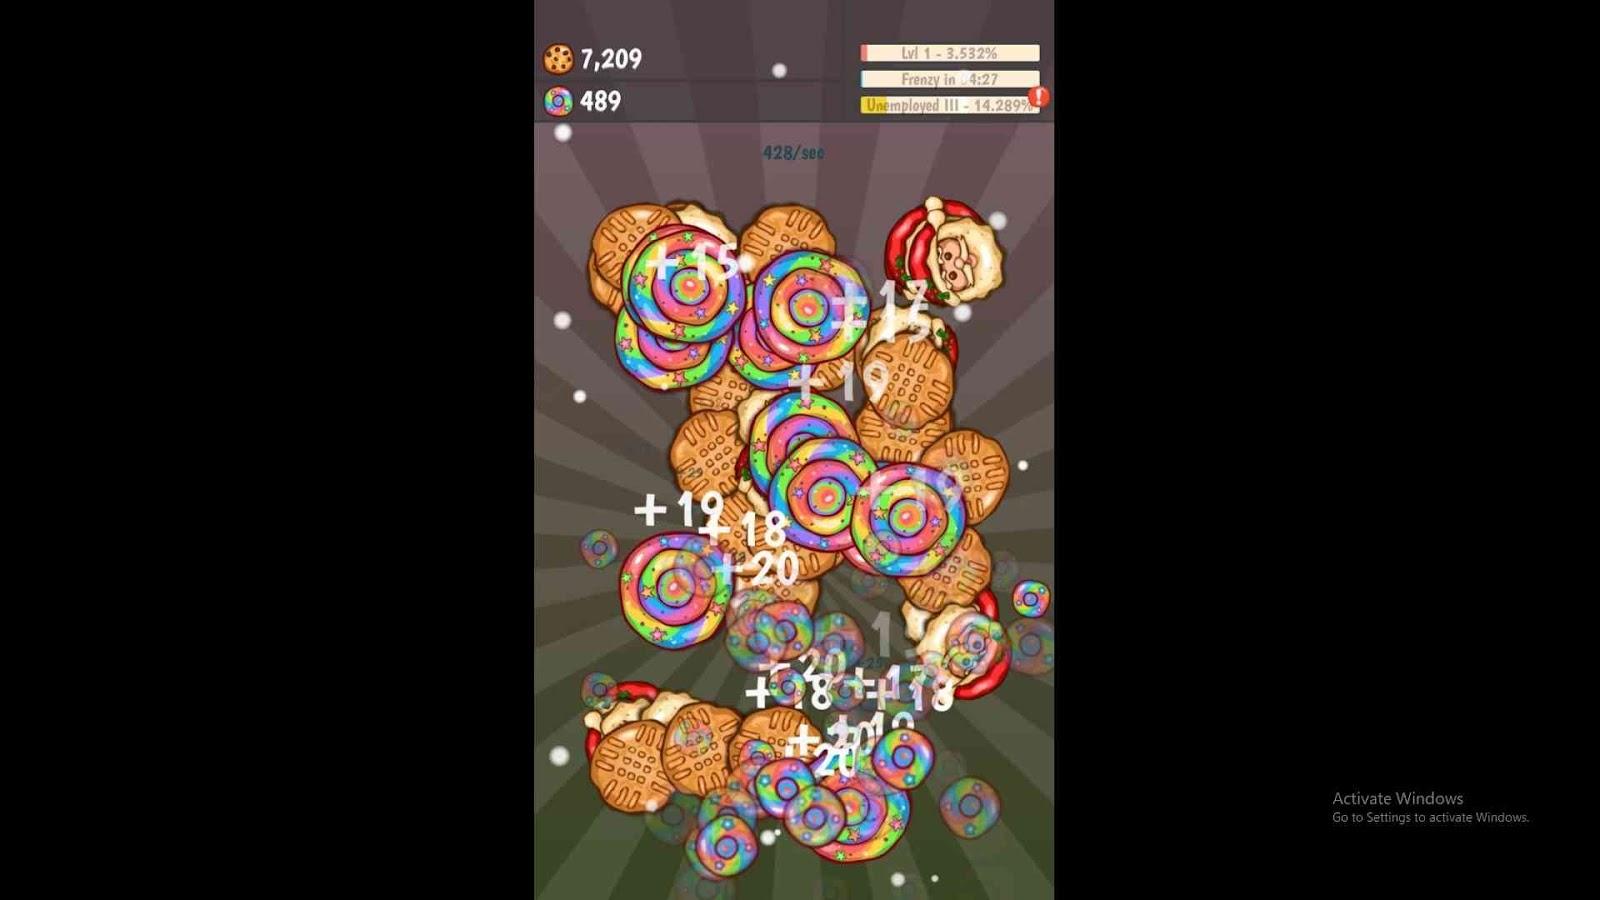 Cookies Inc. – Idle Clicker